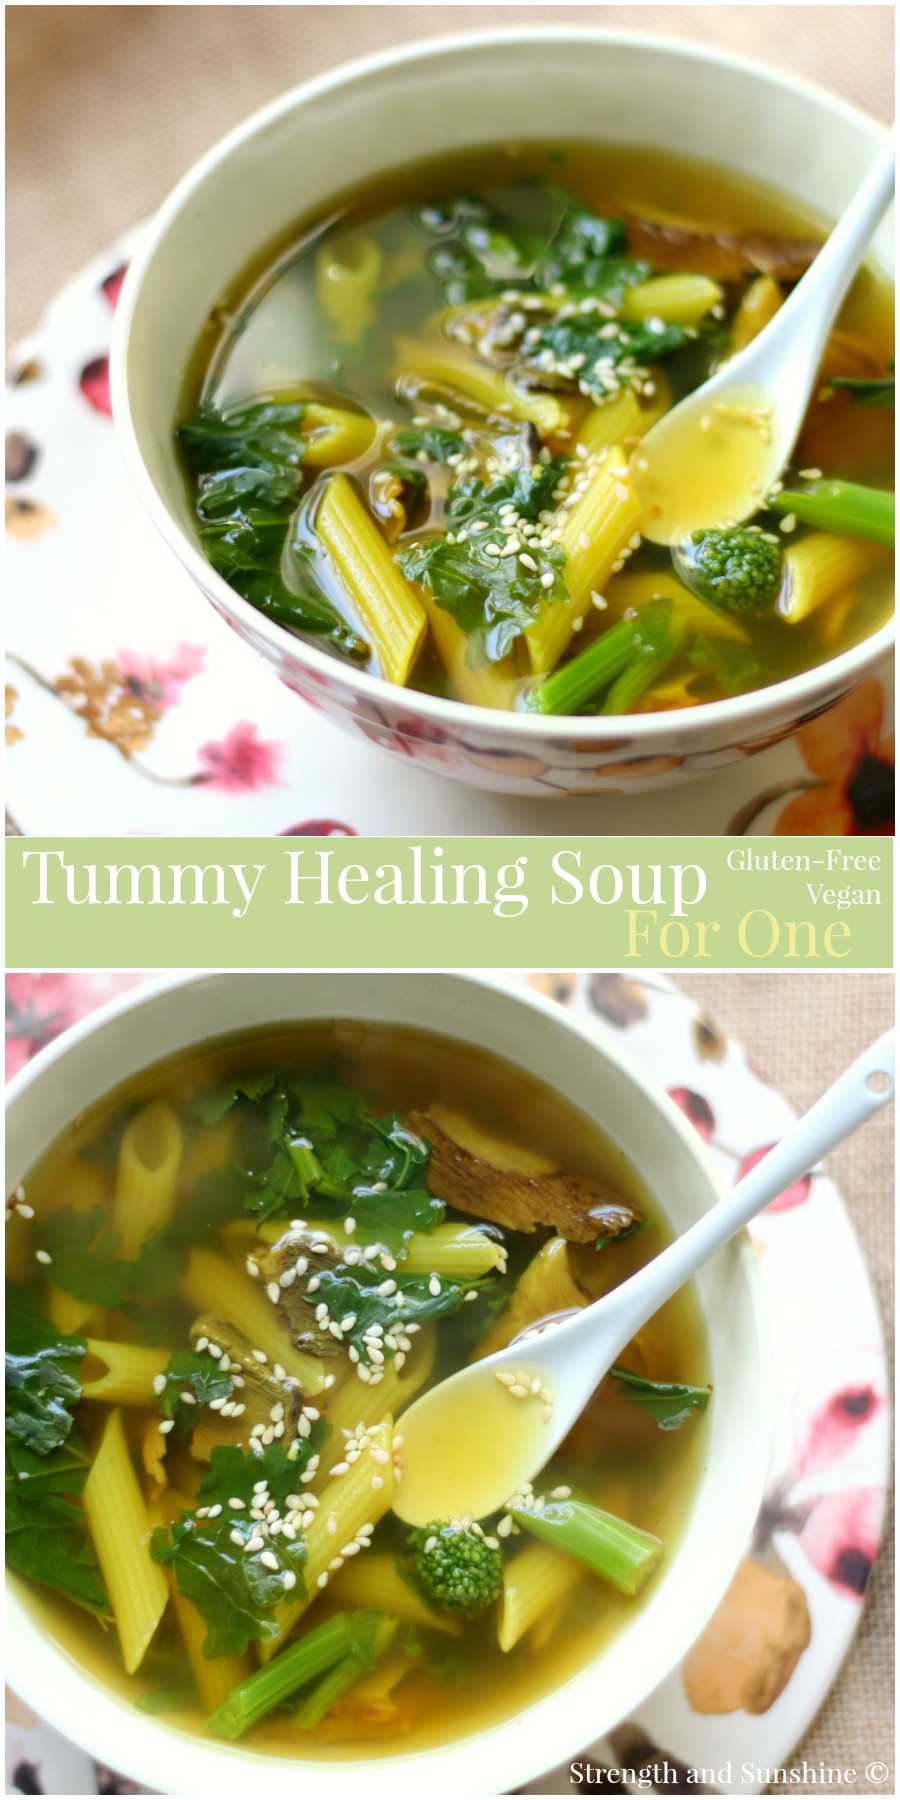 Tummy Healing Soup For One | Strength and Sunshine @RebeccaGF666 Soup for the soul. A gluten-free and vegan tummy healing soup for one full of anti-inflammatory and nourishing ingredients. Turmeric, ginger, veggies, spices, and a bit of pasta to bring you all the love your body needs. @BarillaUS #GlutenFreeBarilla #Pmedia #ad